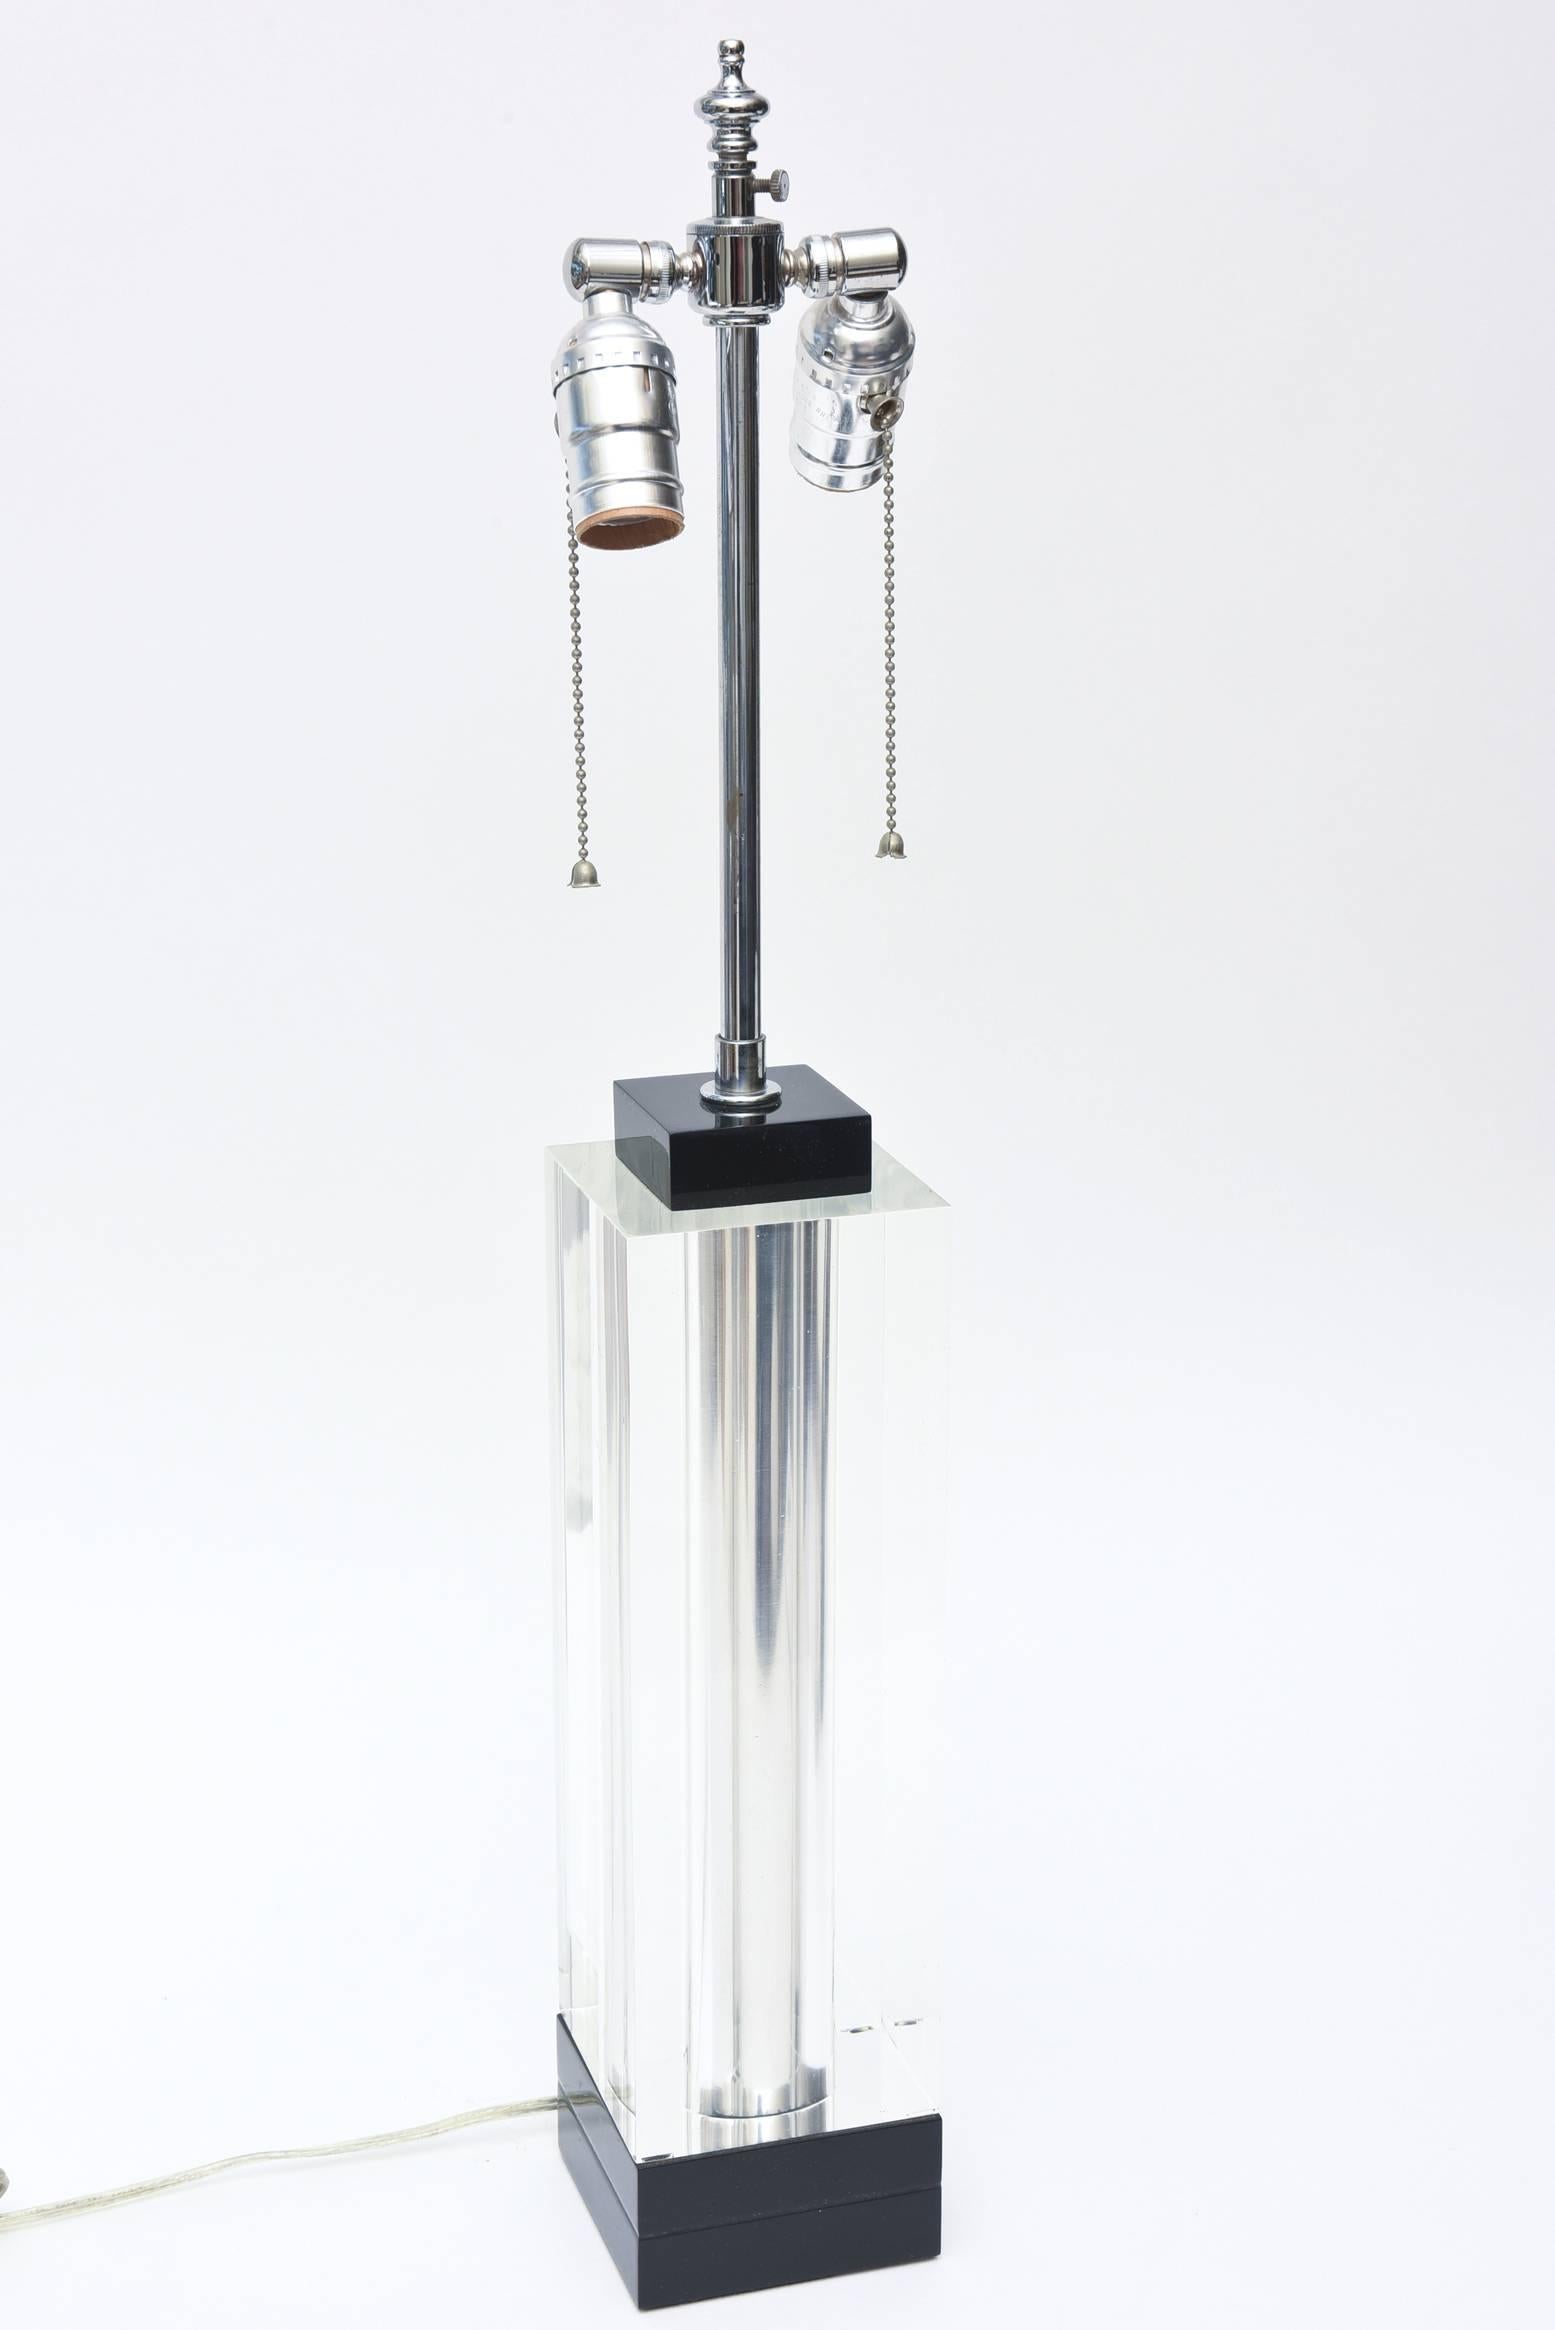 This handsome and modern square lucite lamp is clear in the center banded by a black lucite base and top. It has a polished steel column in the center that looks like it is floating. It is in excellent condition and makes for a sensational desk or